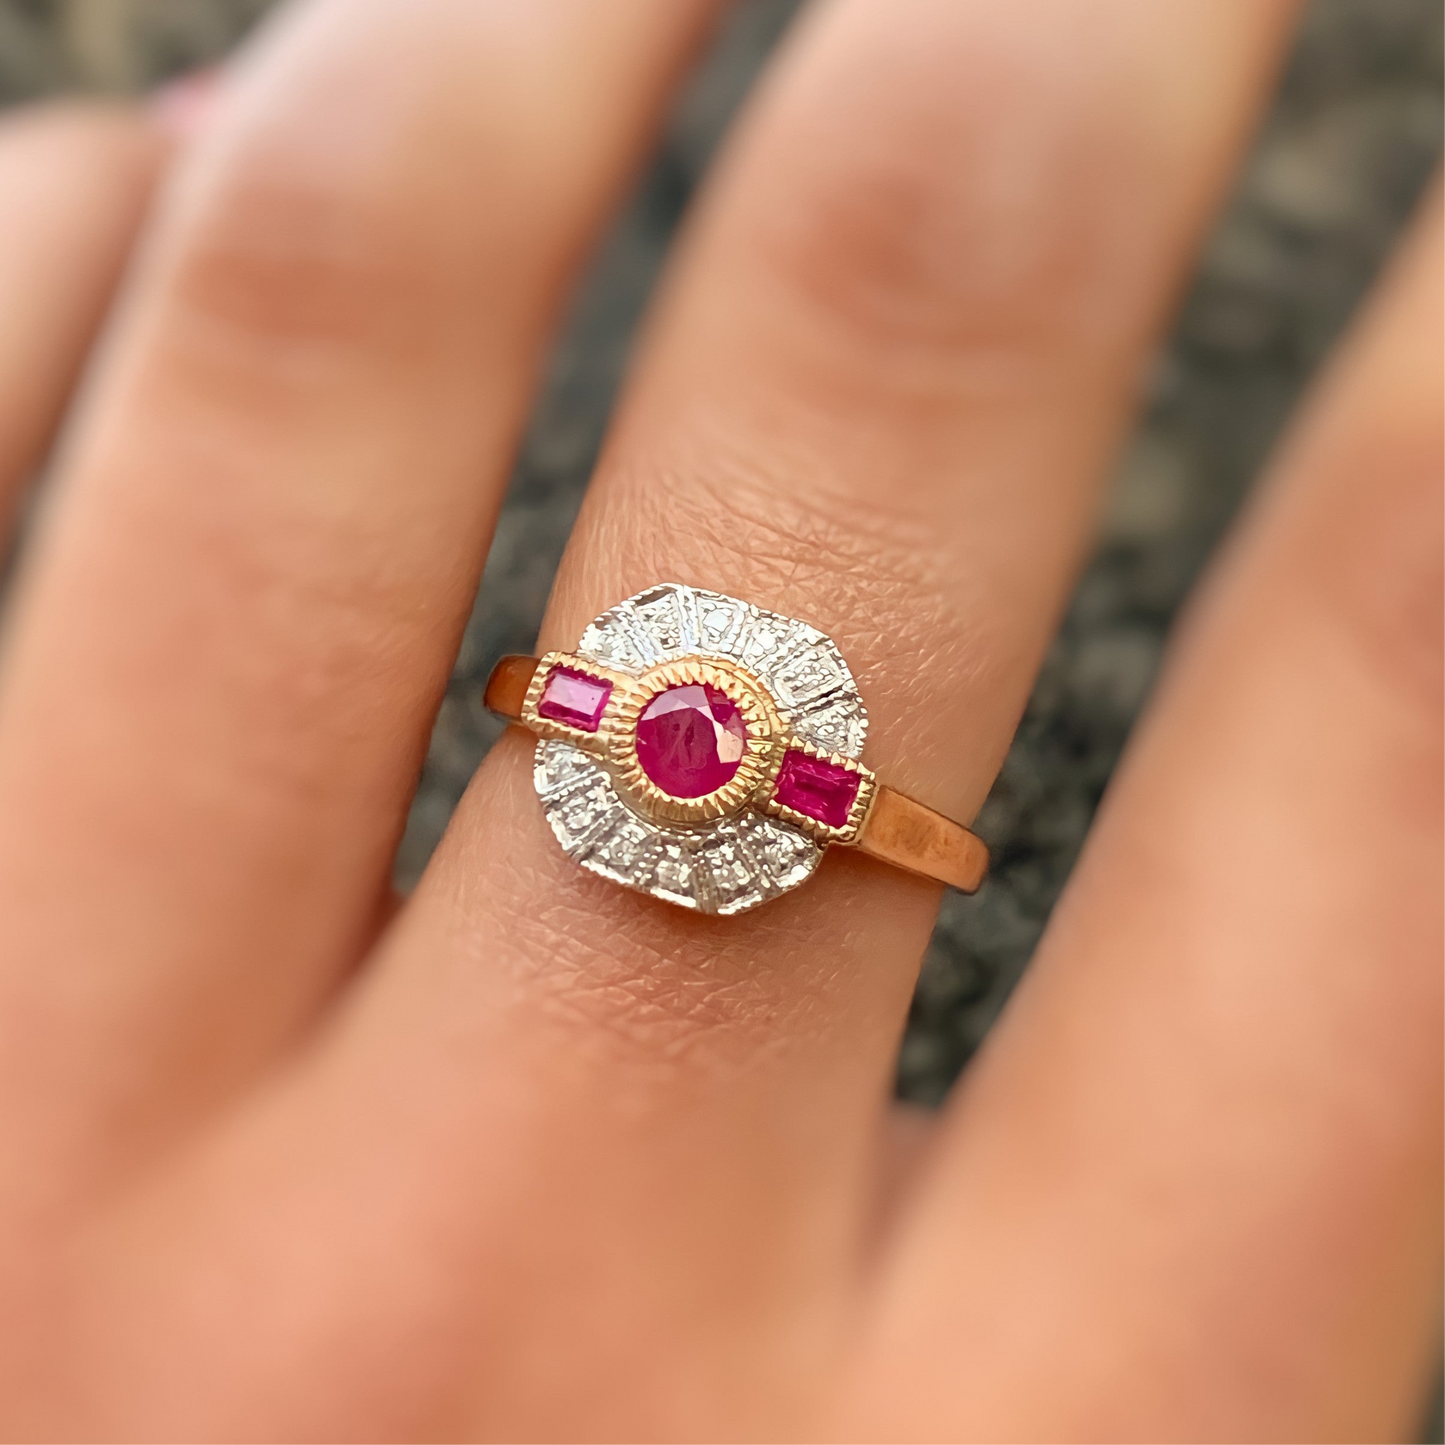 9ct Yellow Gold Art Deco Reproduction Ruby and Diamond Ring – Size N